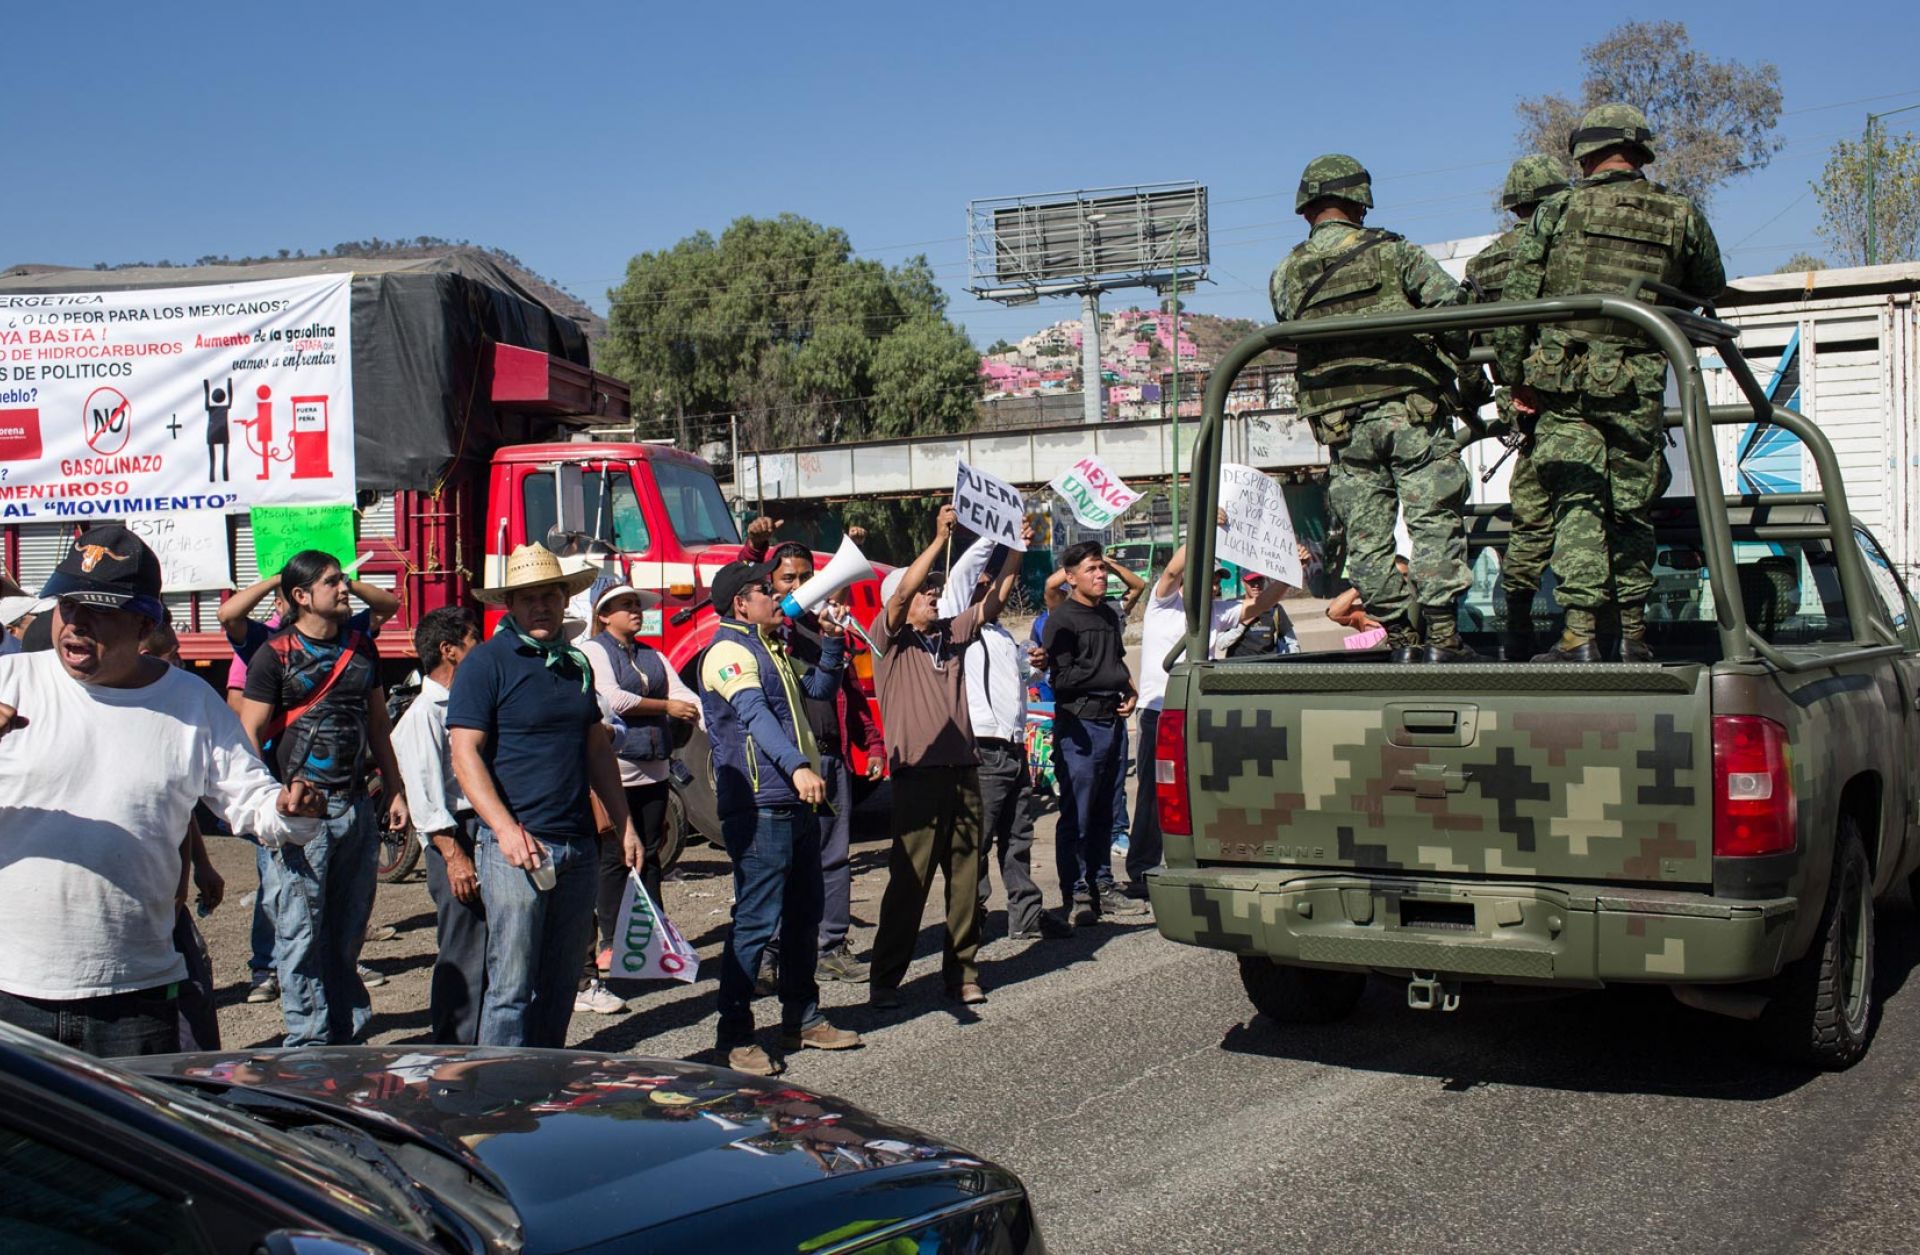 If Fuel Price Protests in Mexico Grow